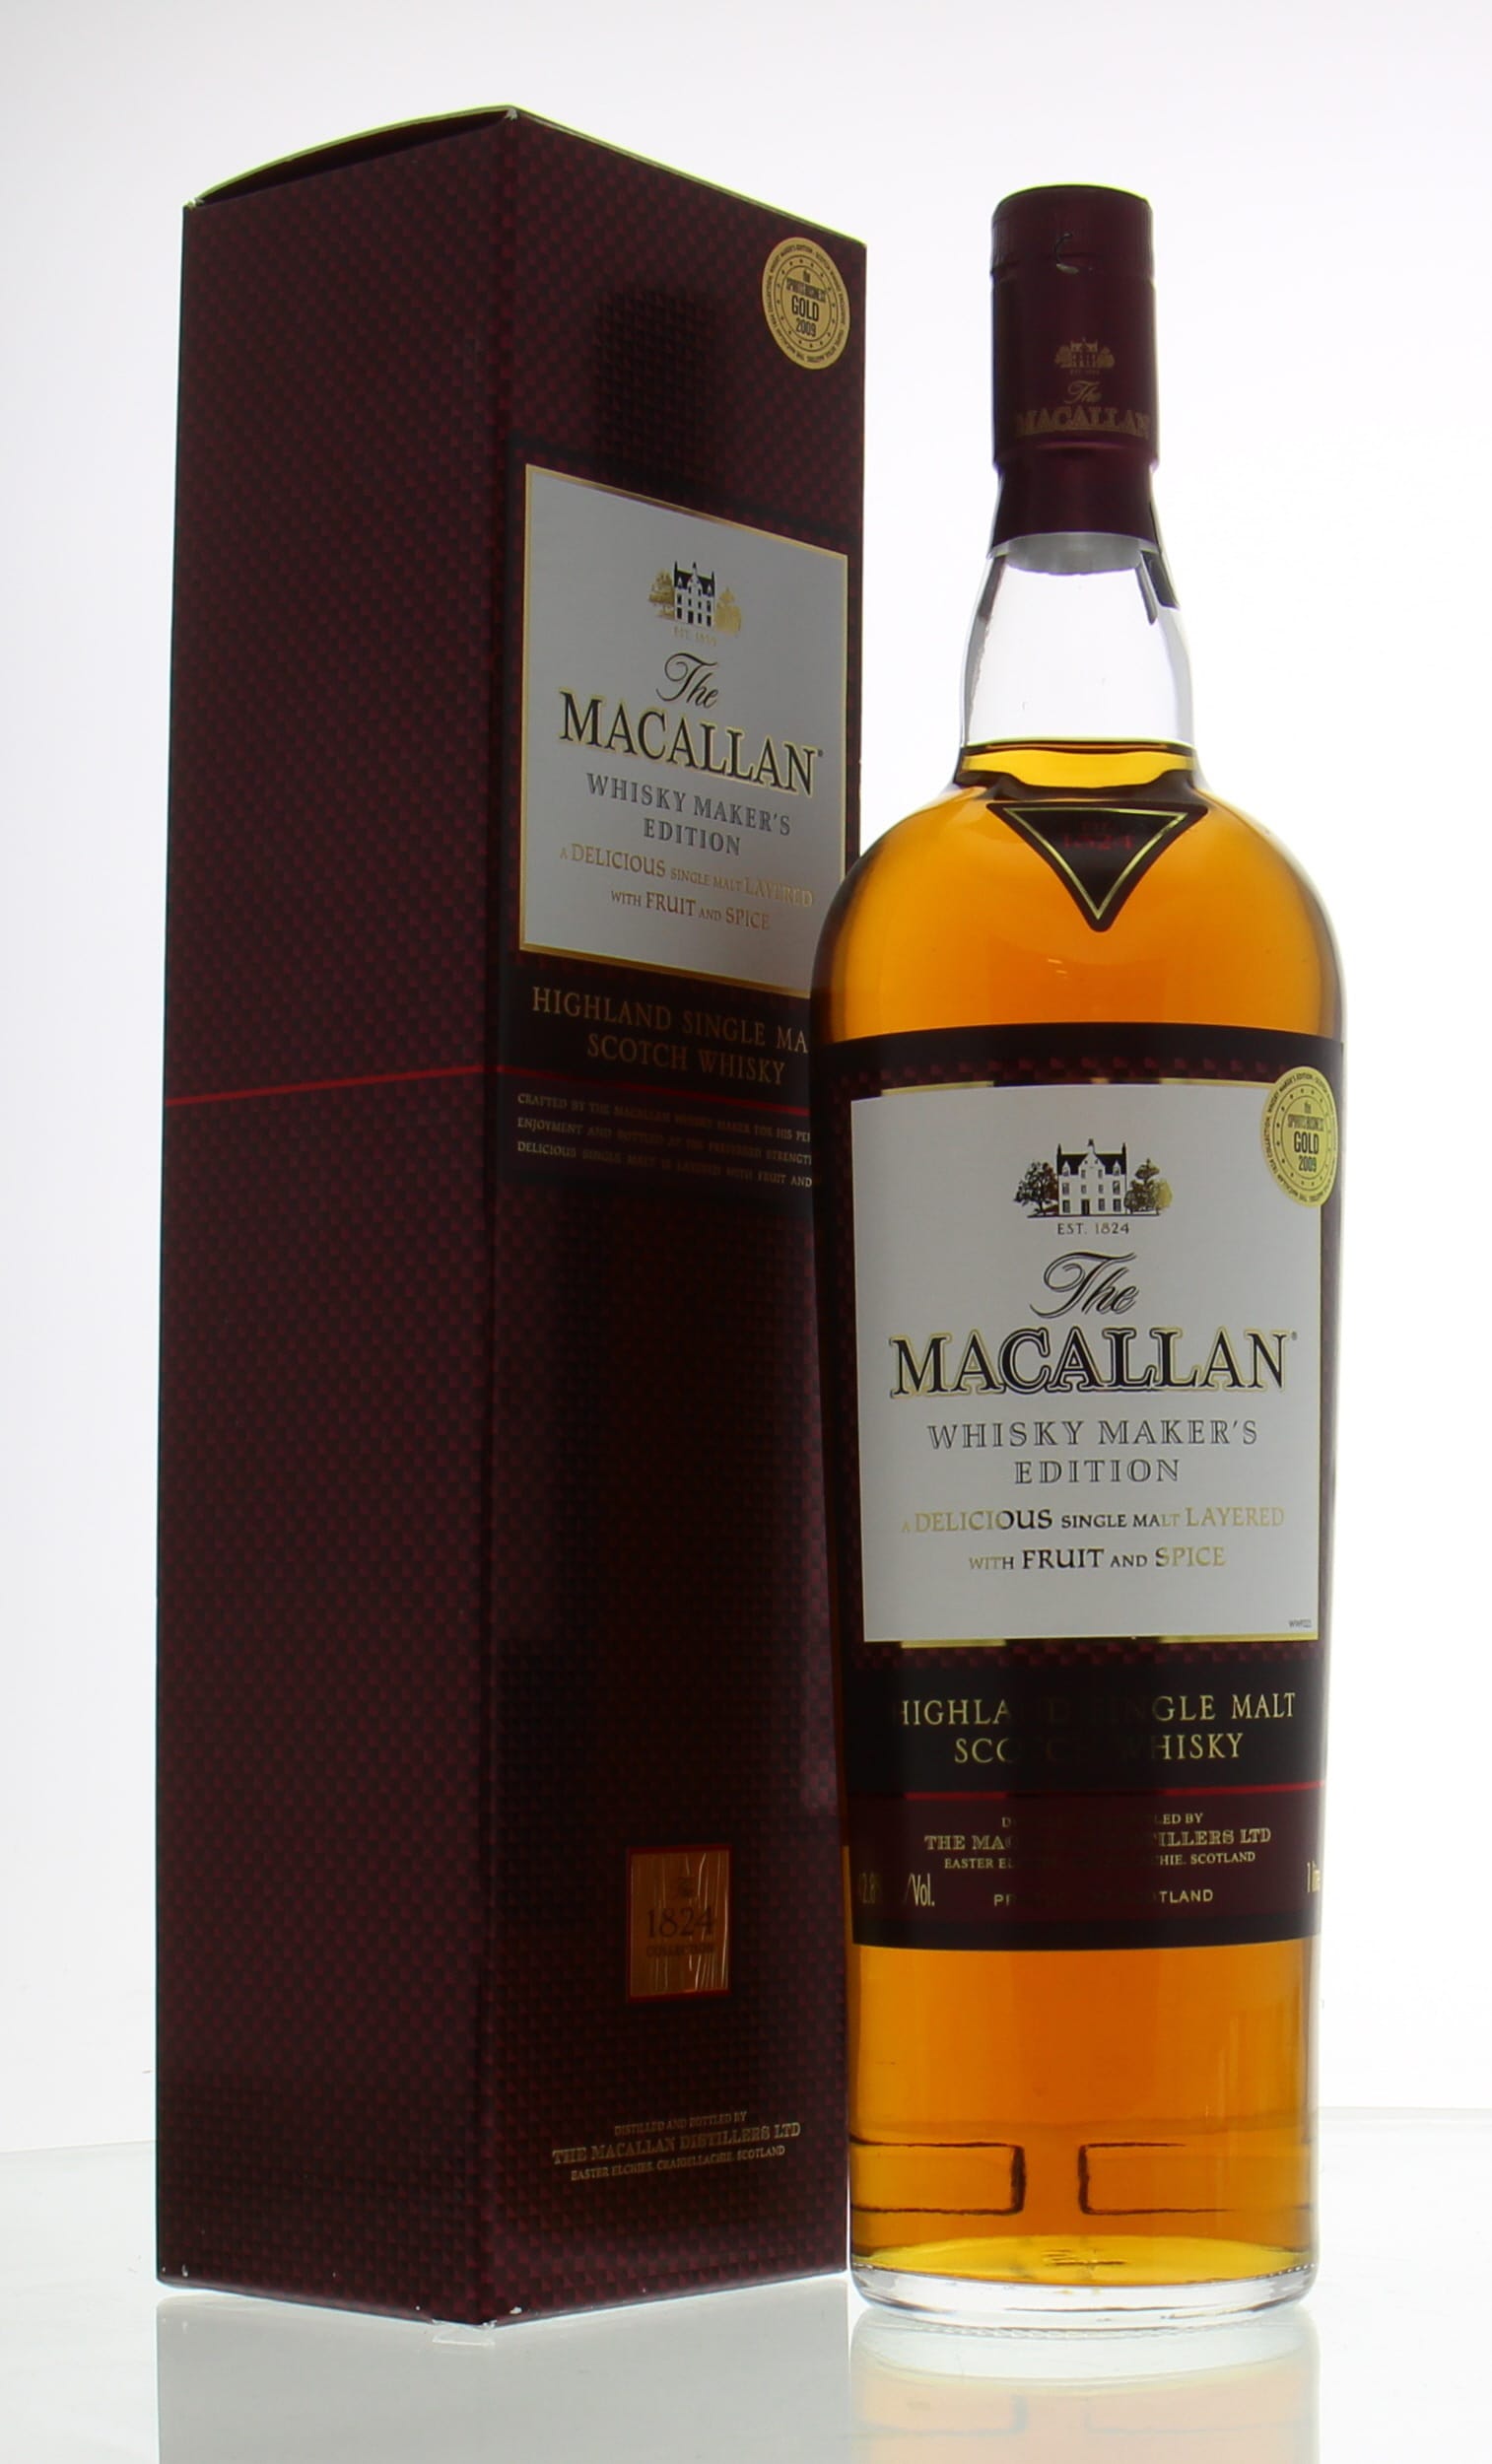 Macallan - Whisky Maker's Edition The 1824 Collection 42.8% NV In Original Container